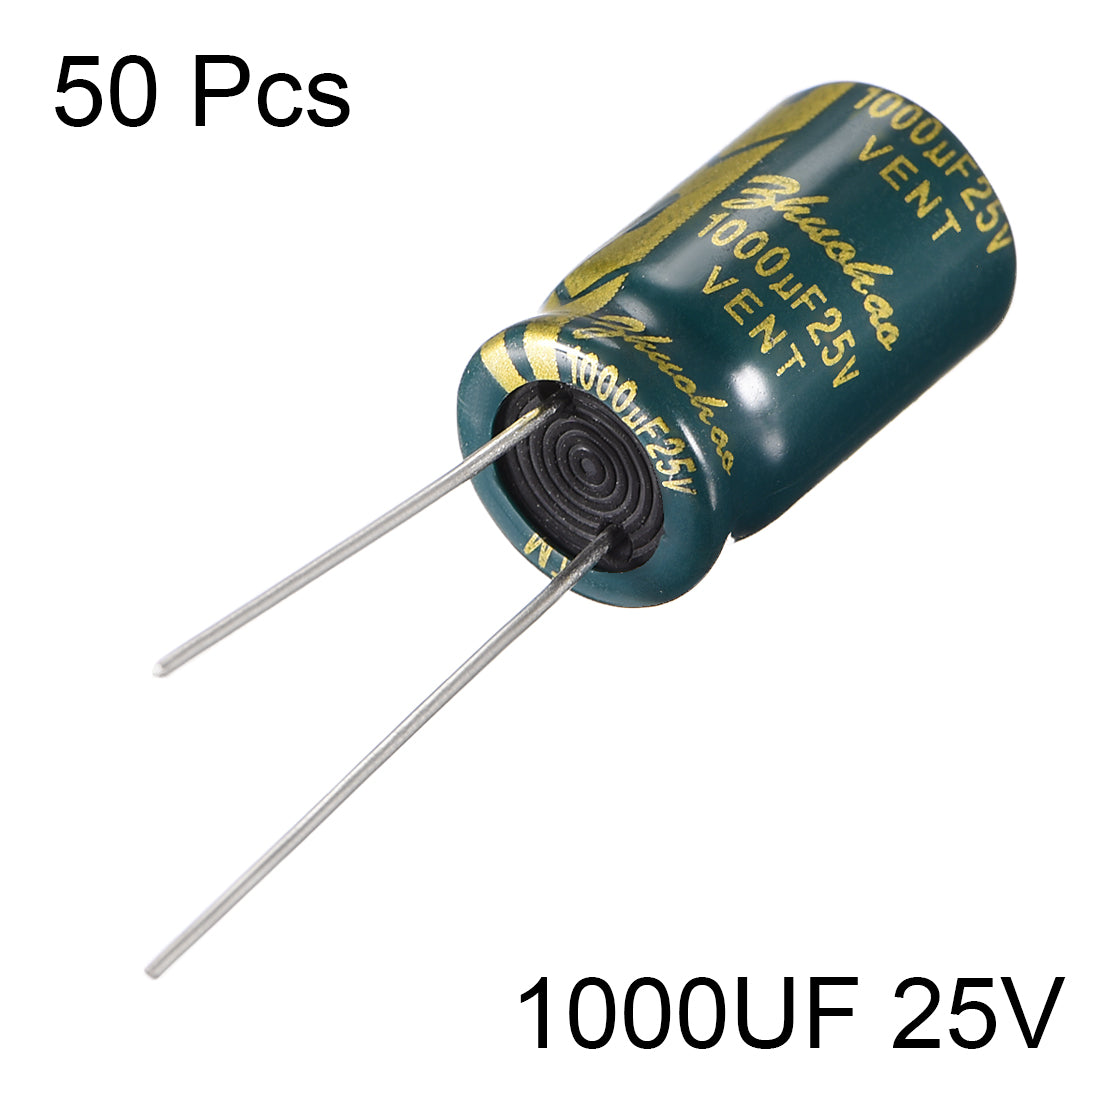 uxcell Uxcell Aluminum Radial Electrolytic Capacitor Low ESR Green with 1000UF 25V 105 Celsius Life 3000H 10 x 17 mm High Ripple Current,Low Impedance 50pcs